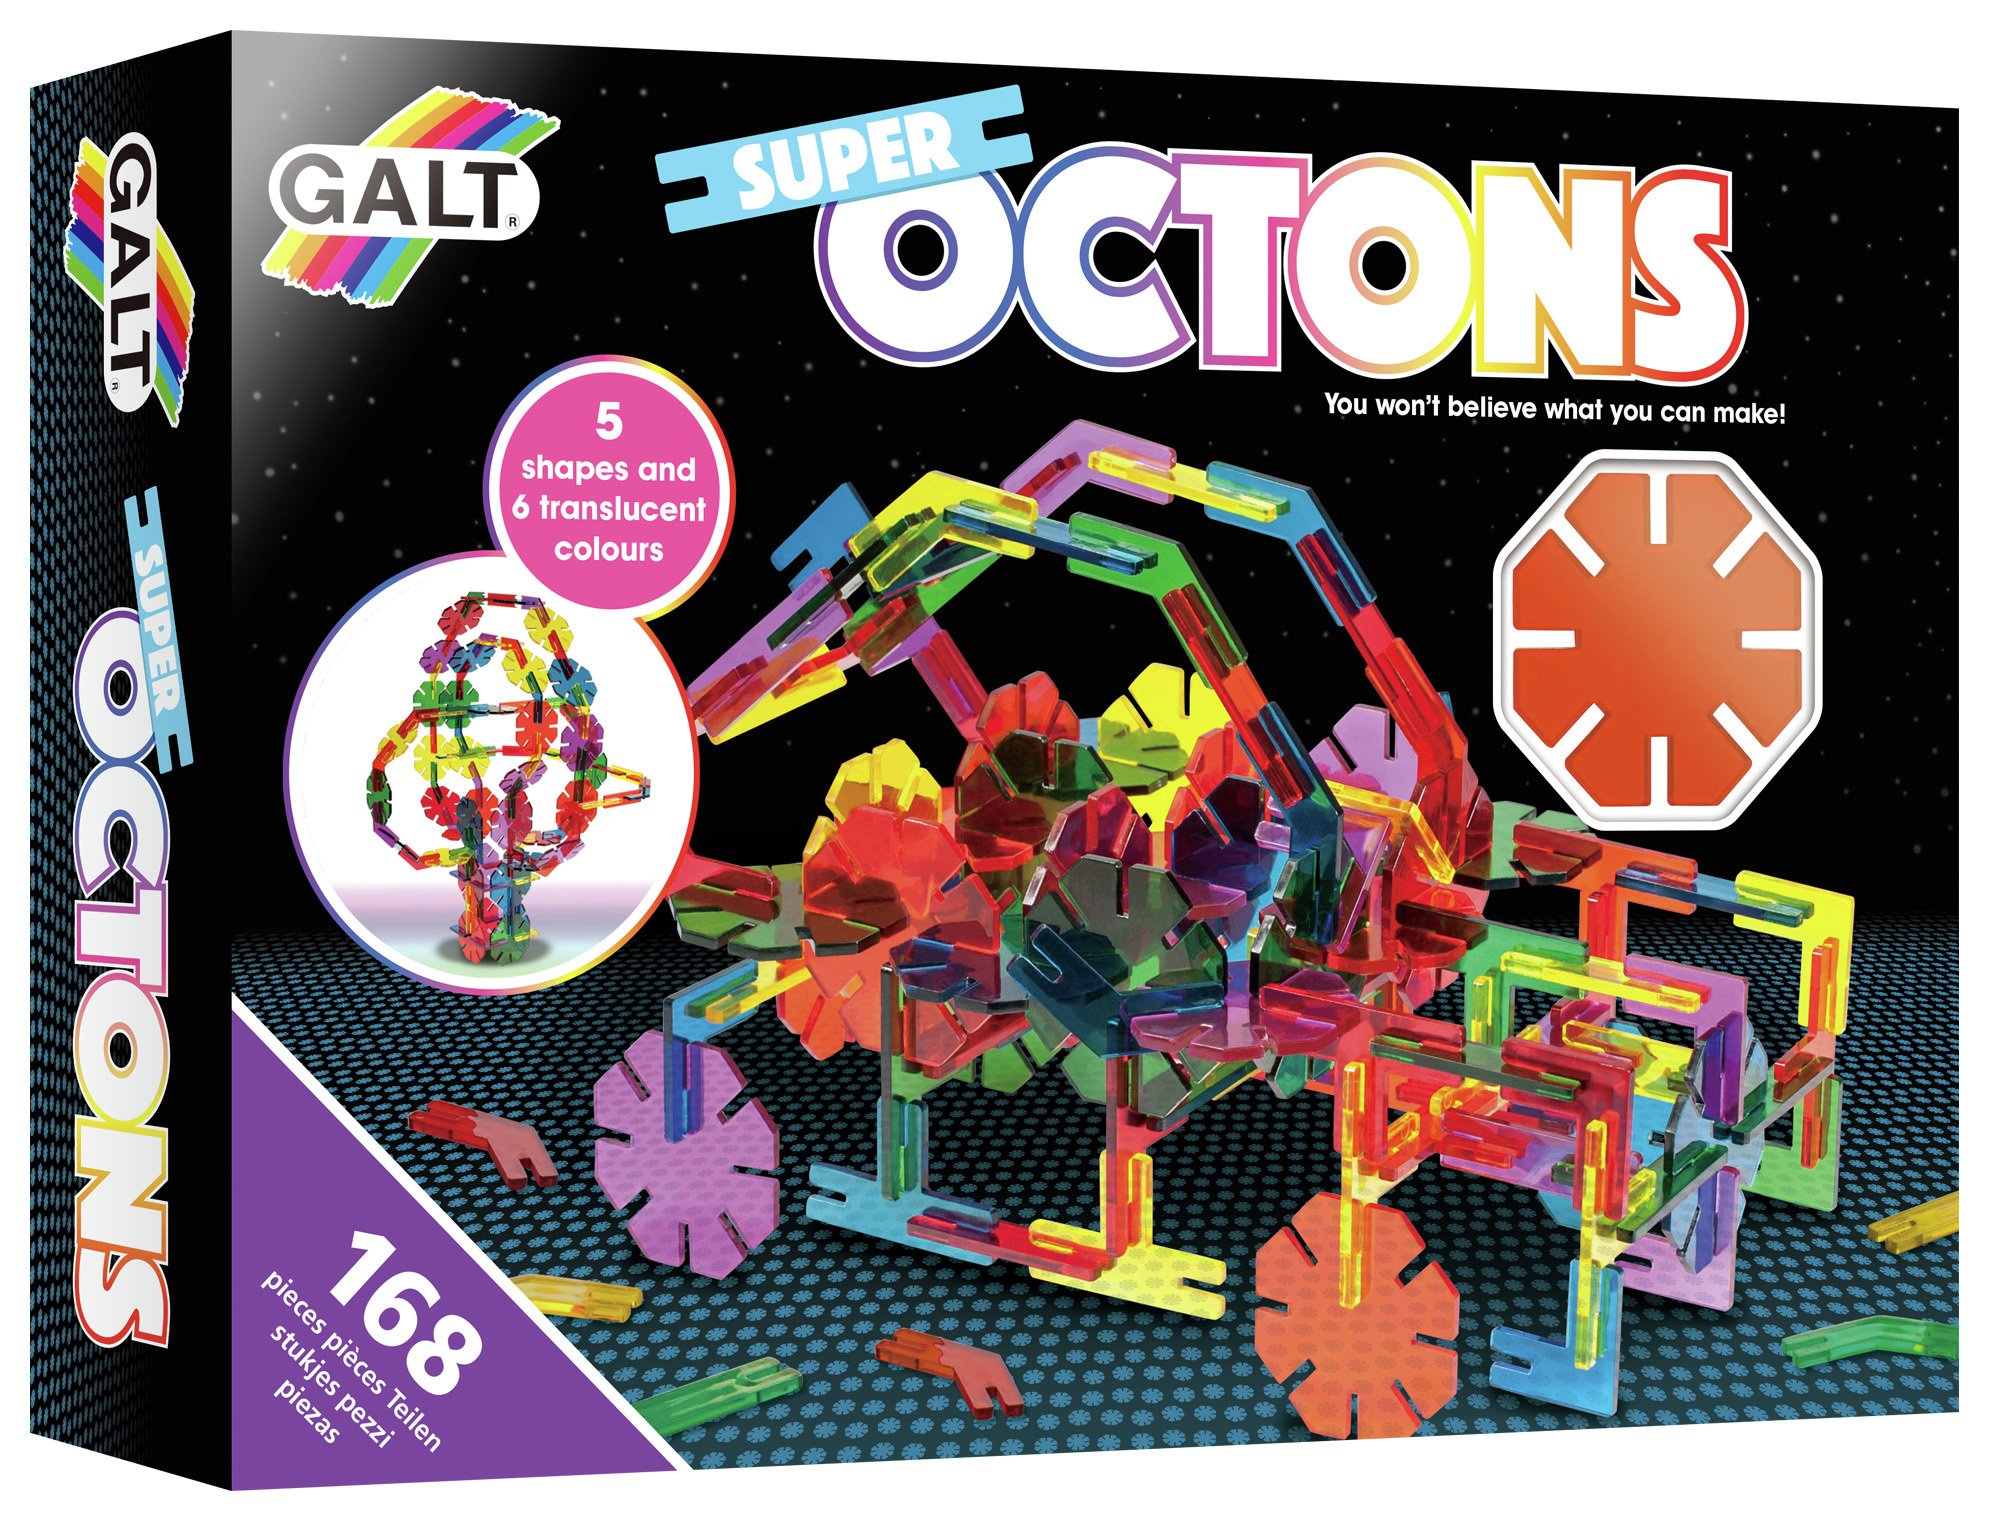 Galt Toys Super Octons Construction Toy Review